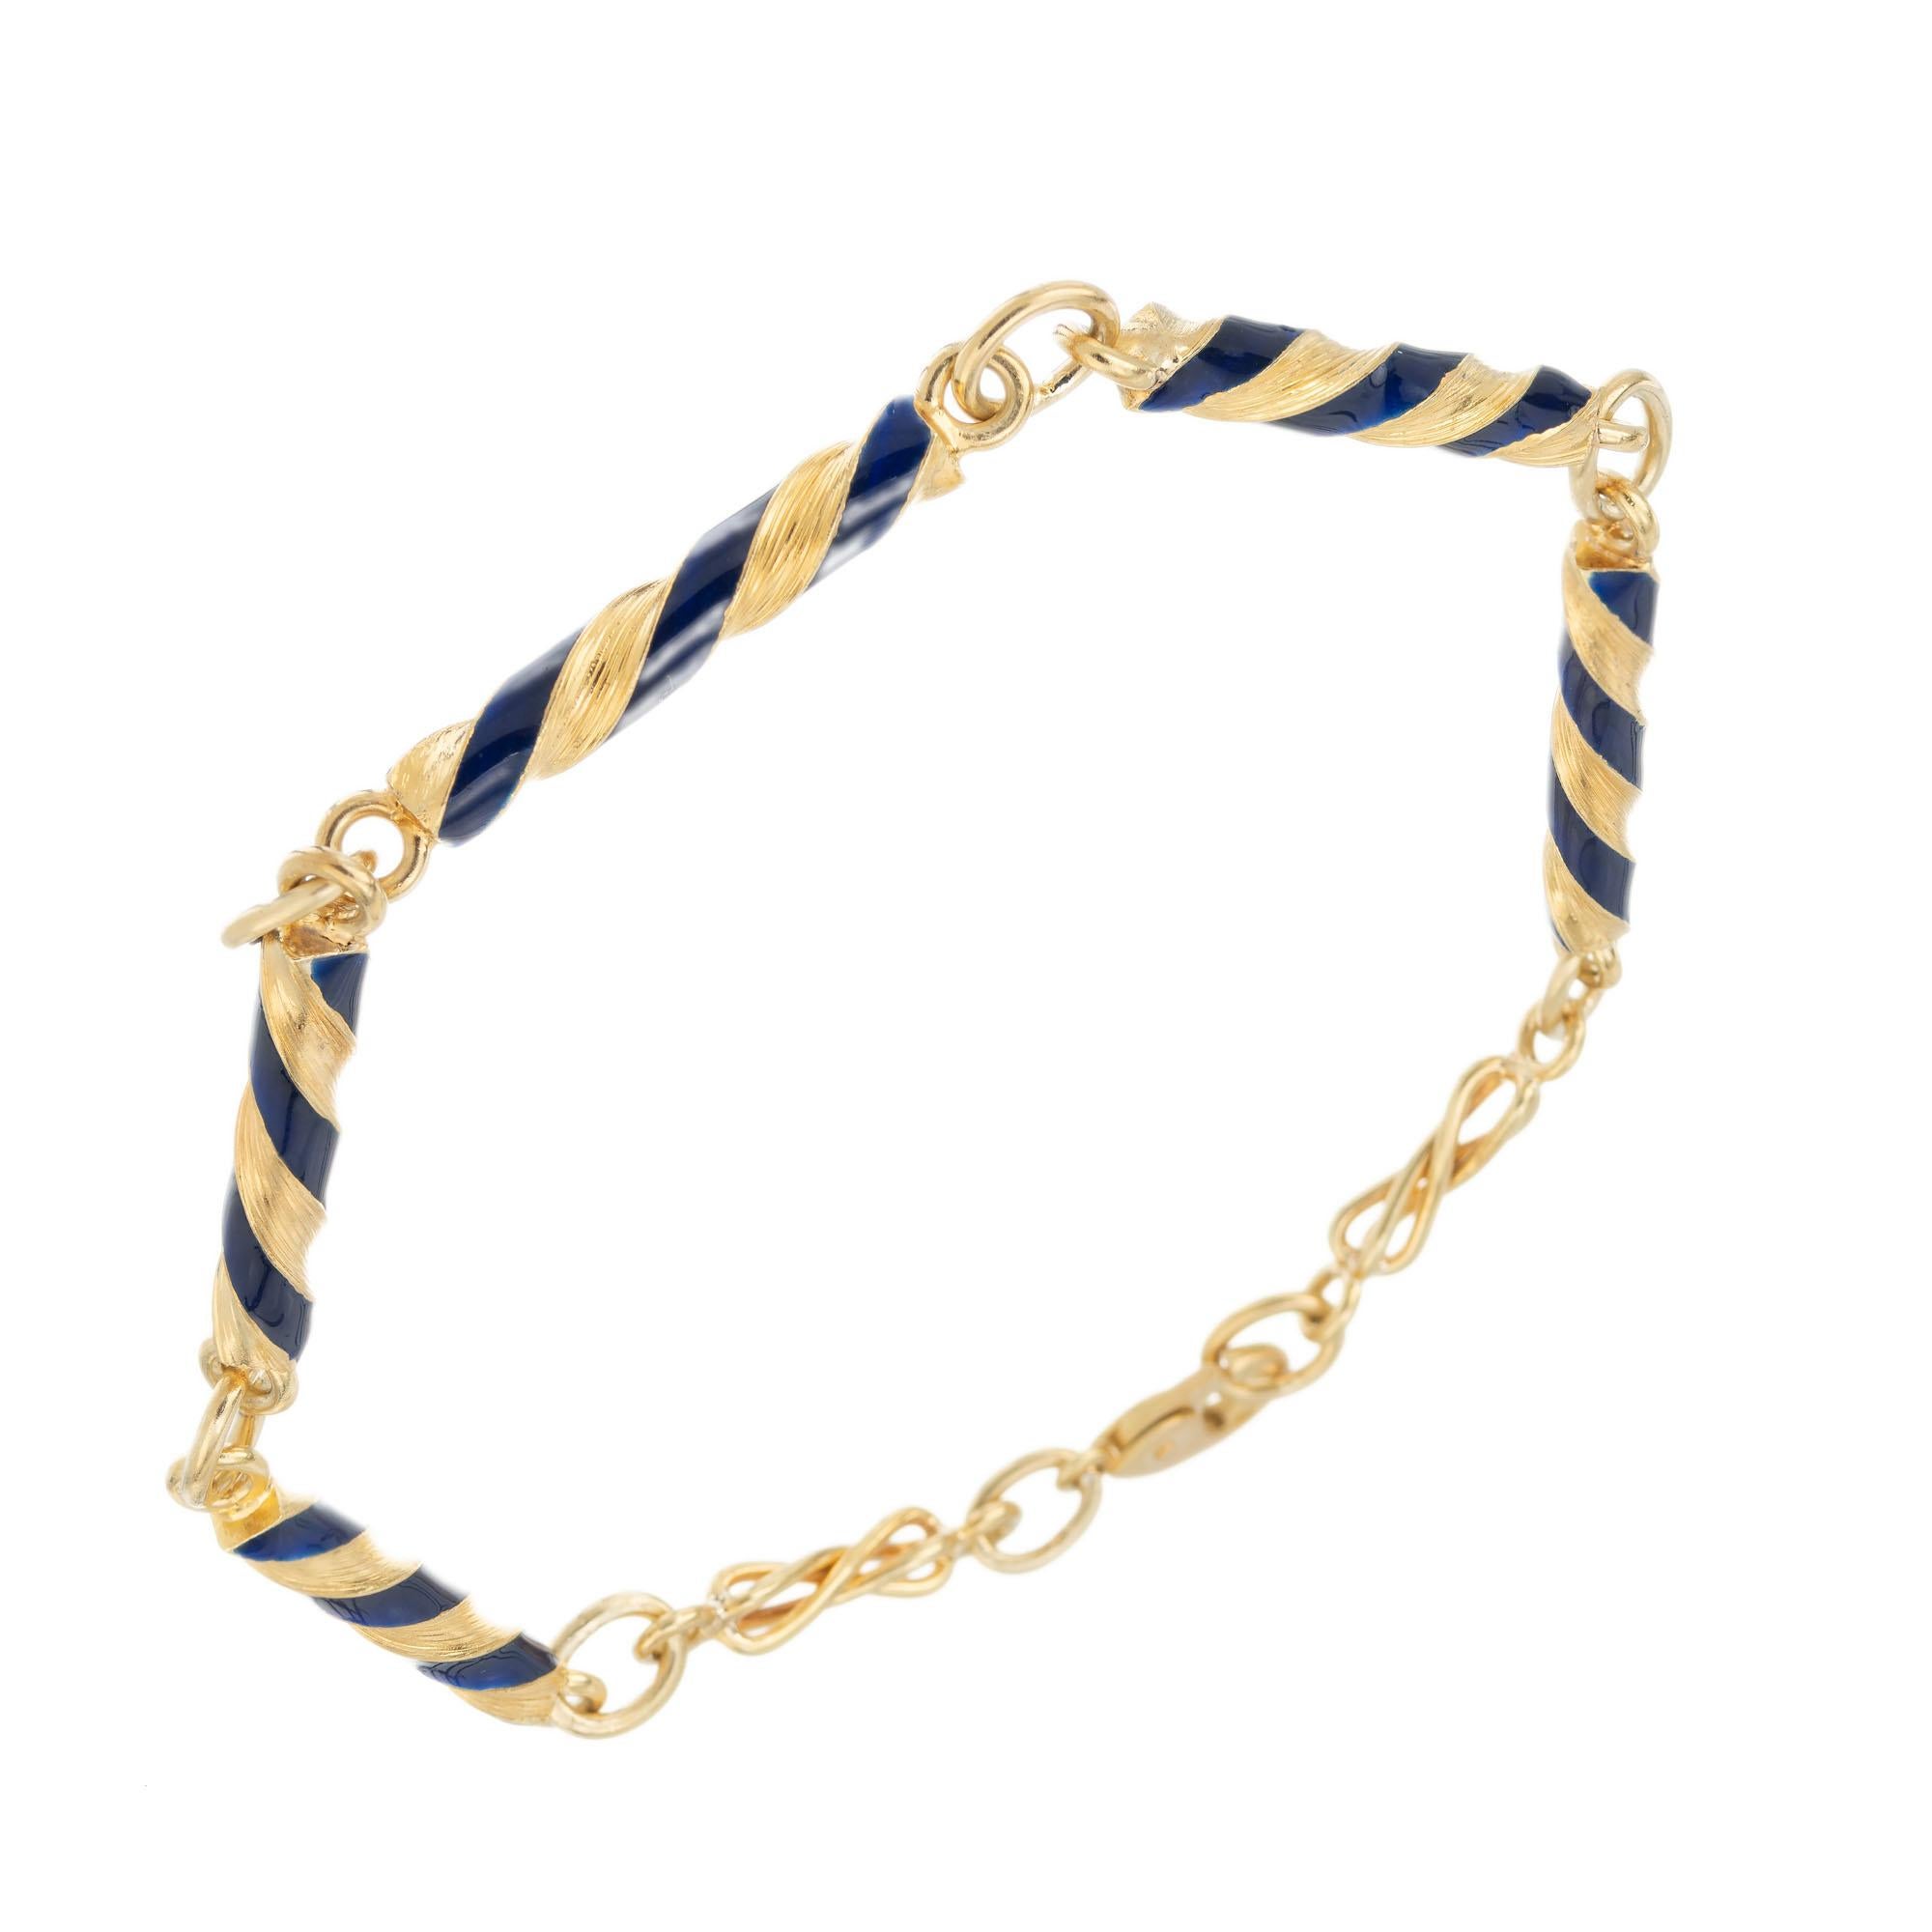 Five section swirl link blue enamel 18k yellow gold 8 Inch Bracelet.

Blue enamel
18k yellow gold 
Stamped: K18
10.0 grams
Bracelet: 8 Inches
Width: 3.6mm
Depth or thickness: 3.6mm
